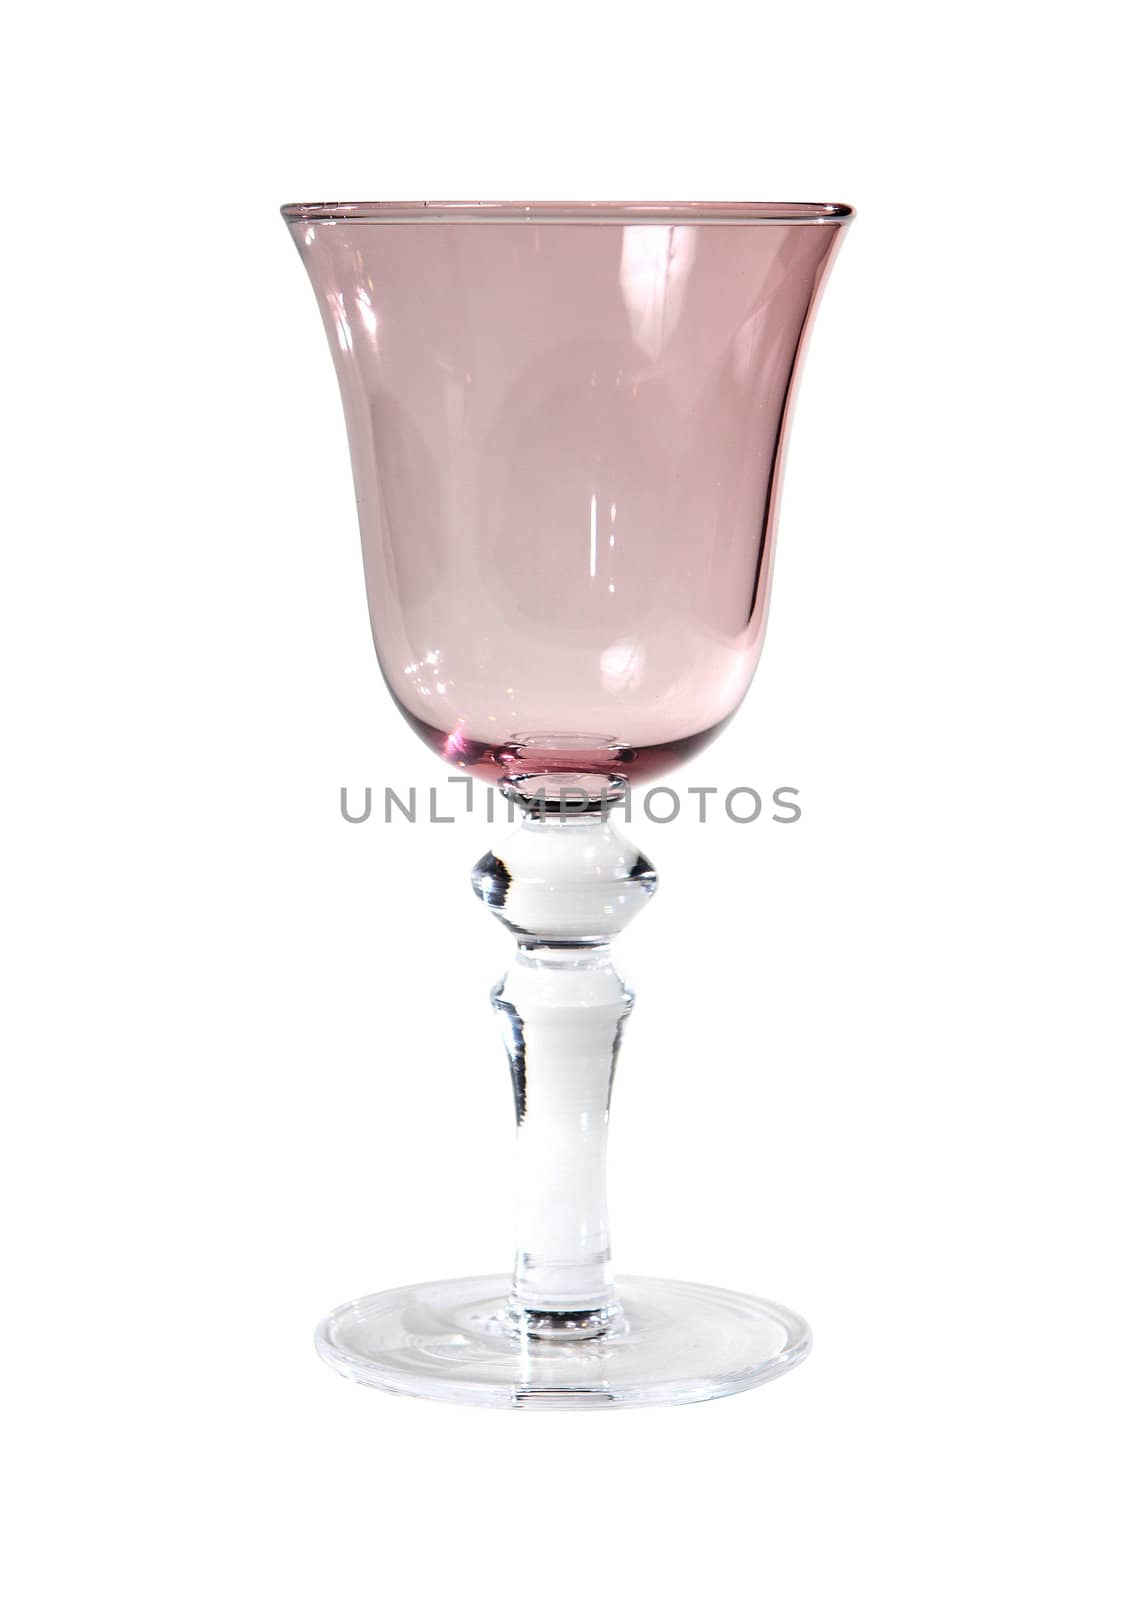 Winecup isolated on white. With clipping path.